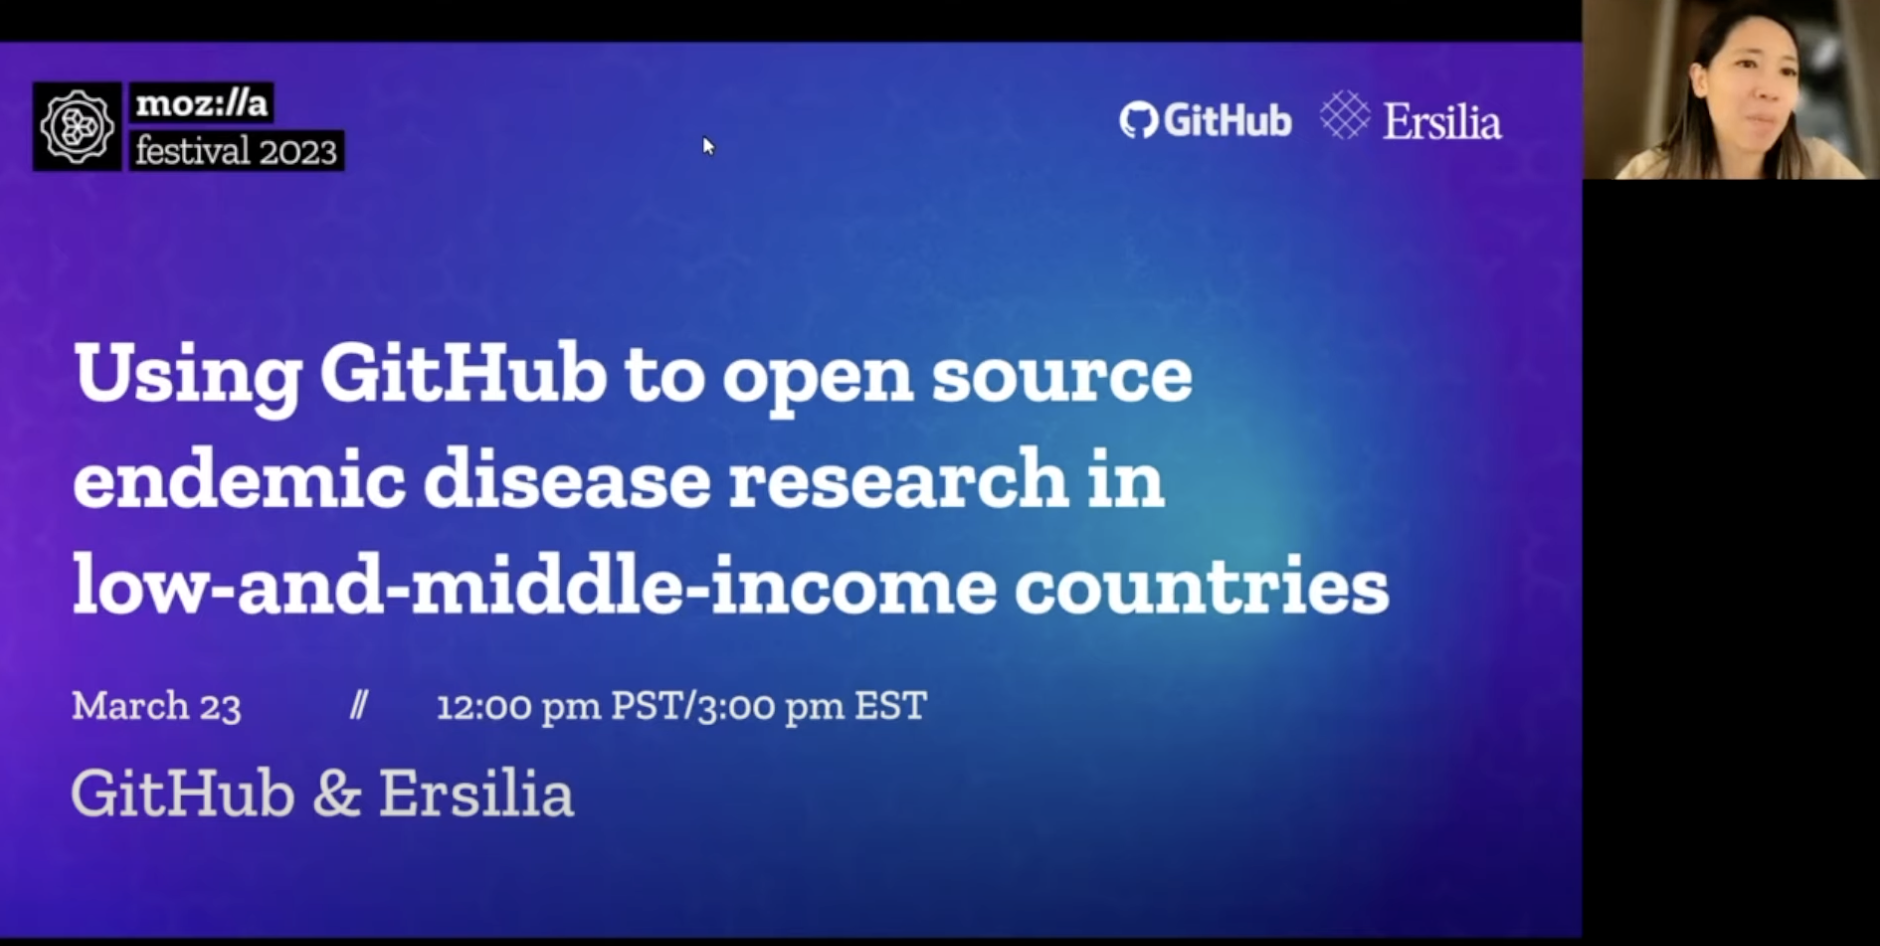 How GitHub and Ersilia open sourced endemic disease research in low-and-middle-income countries